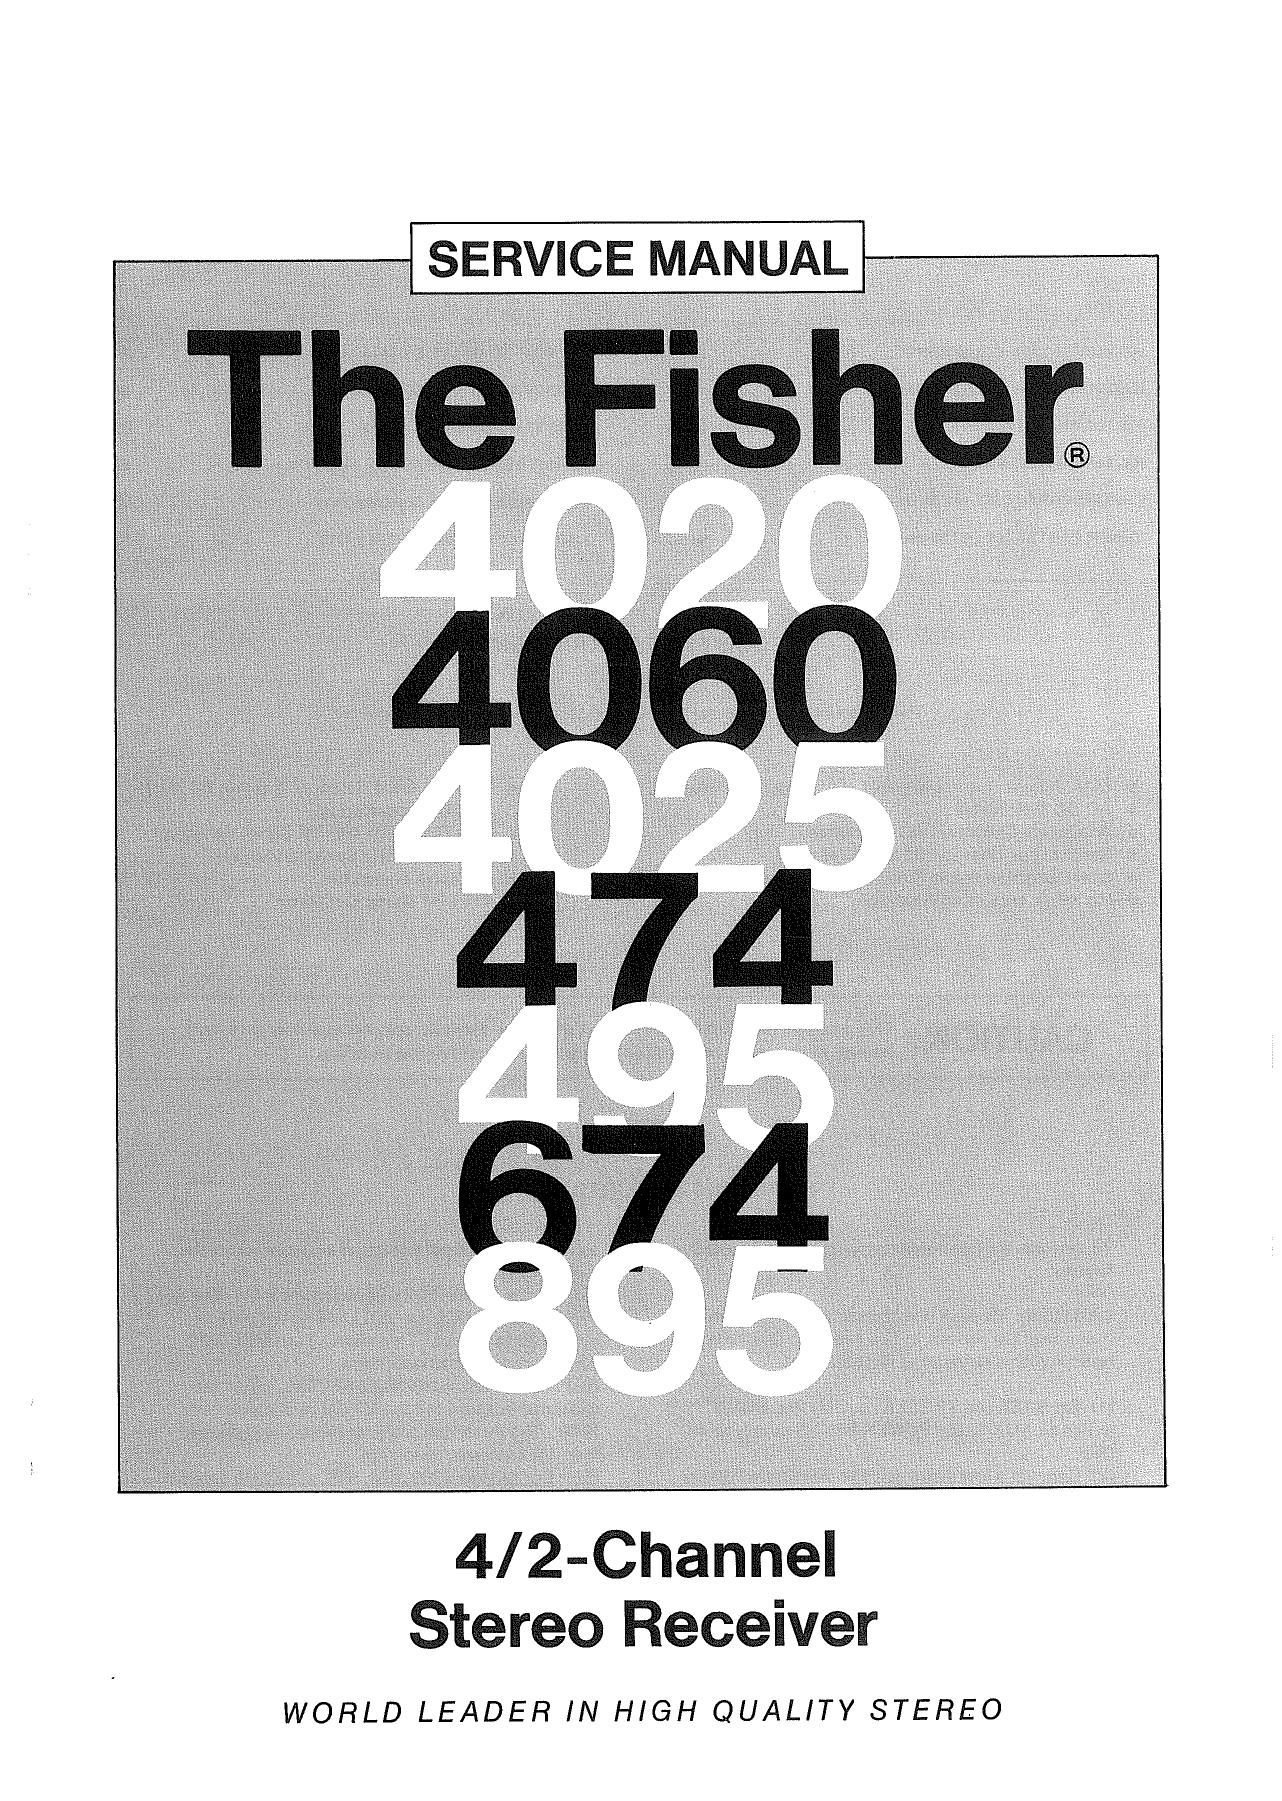 Fisher 474 495 674 895 4020 4025 4060 Service Manual